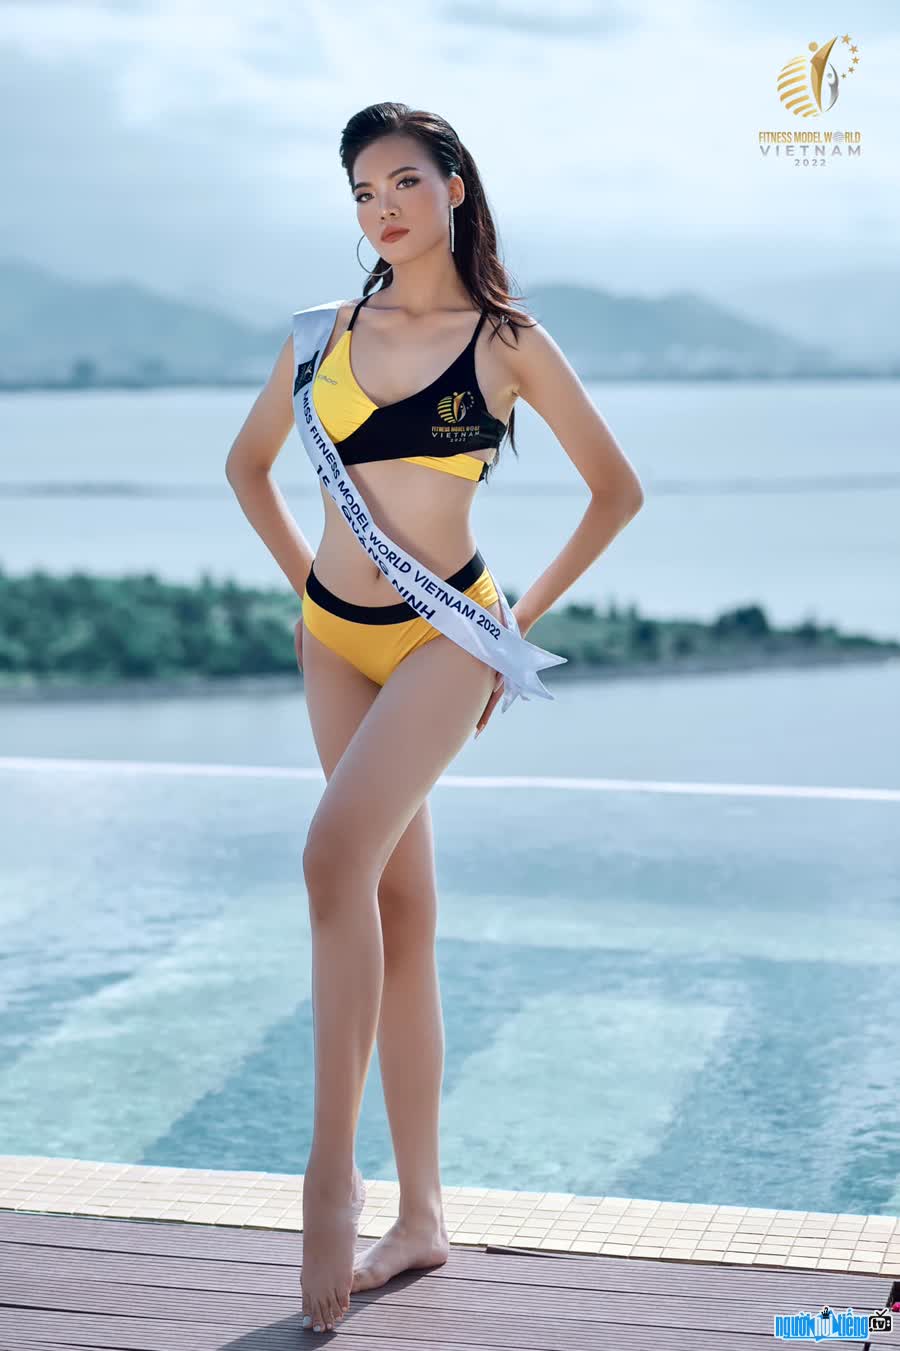 Nguyen Ha Linh excellently becomes 1st Runner-up at Fitness Model World Vietnam 2022